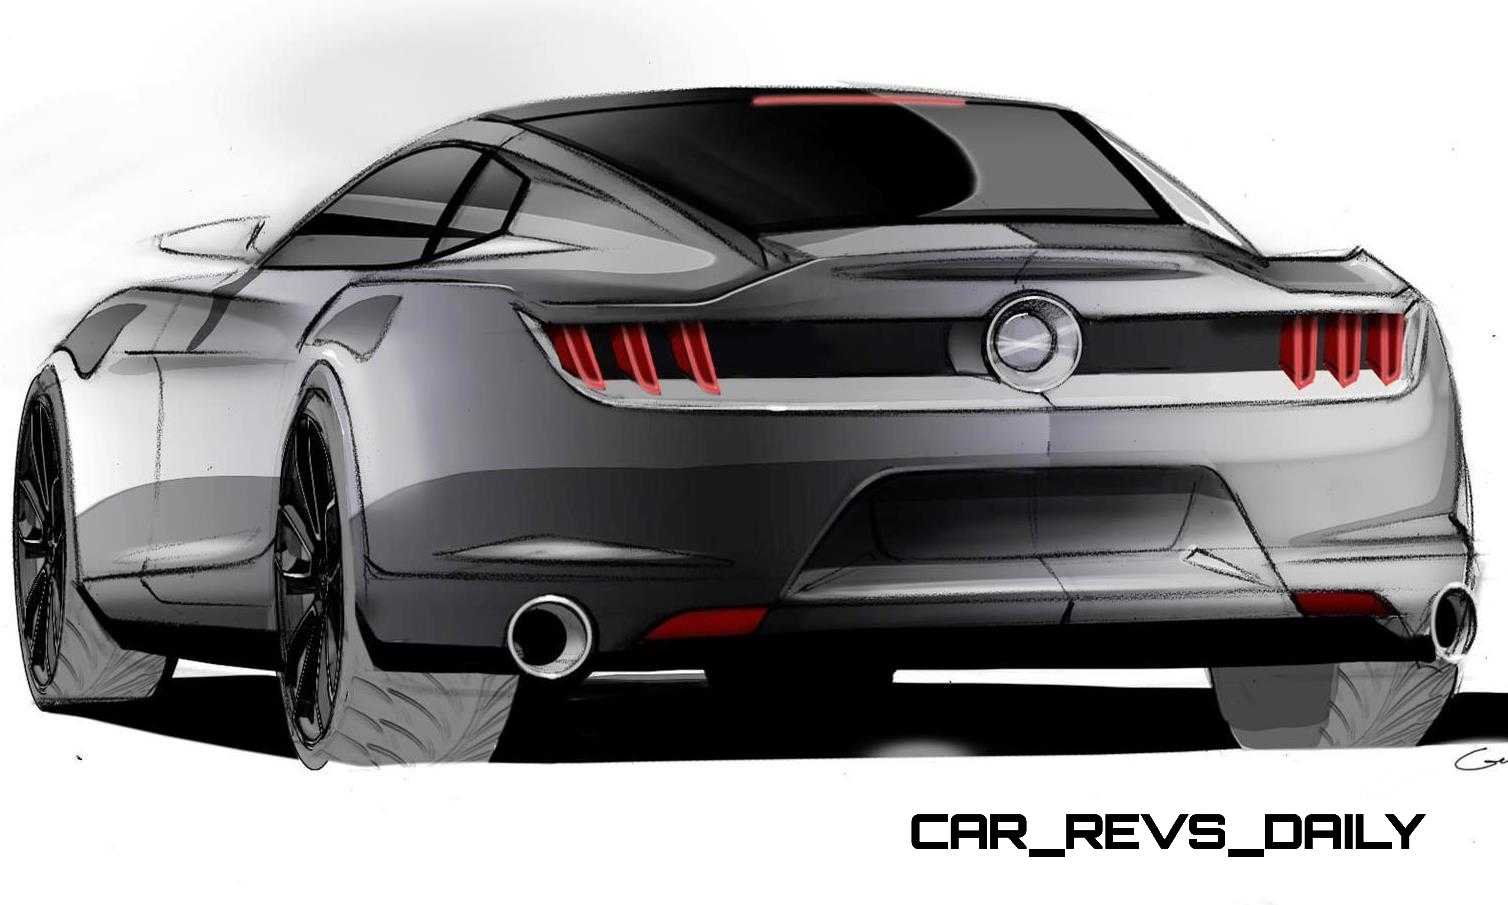 S650 Mustang Mustang S650 Design Previewed by ‘Progressive Energy In Strength’ Sculpture 45B558B3-7BD1-41DB-B1F7-3BDA934728A7